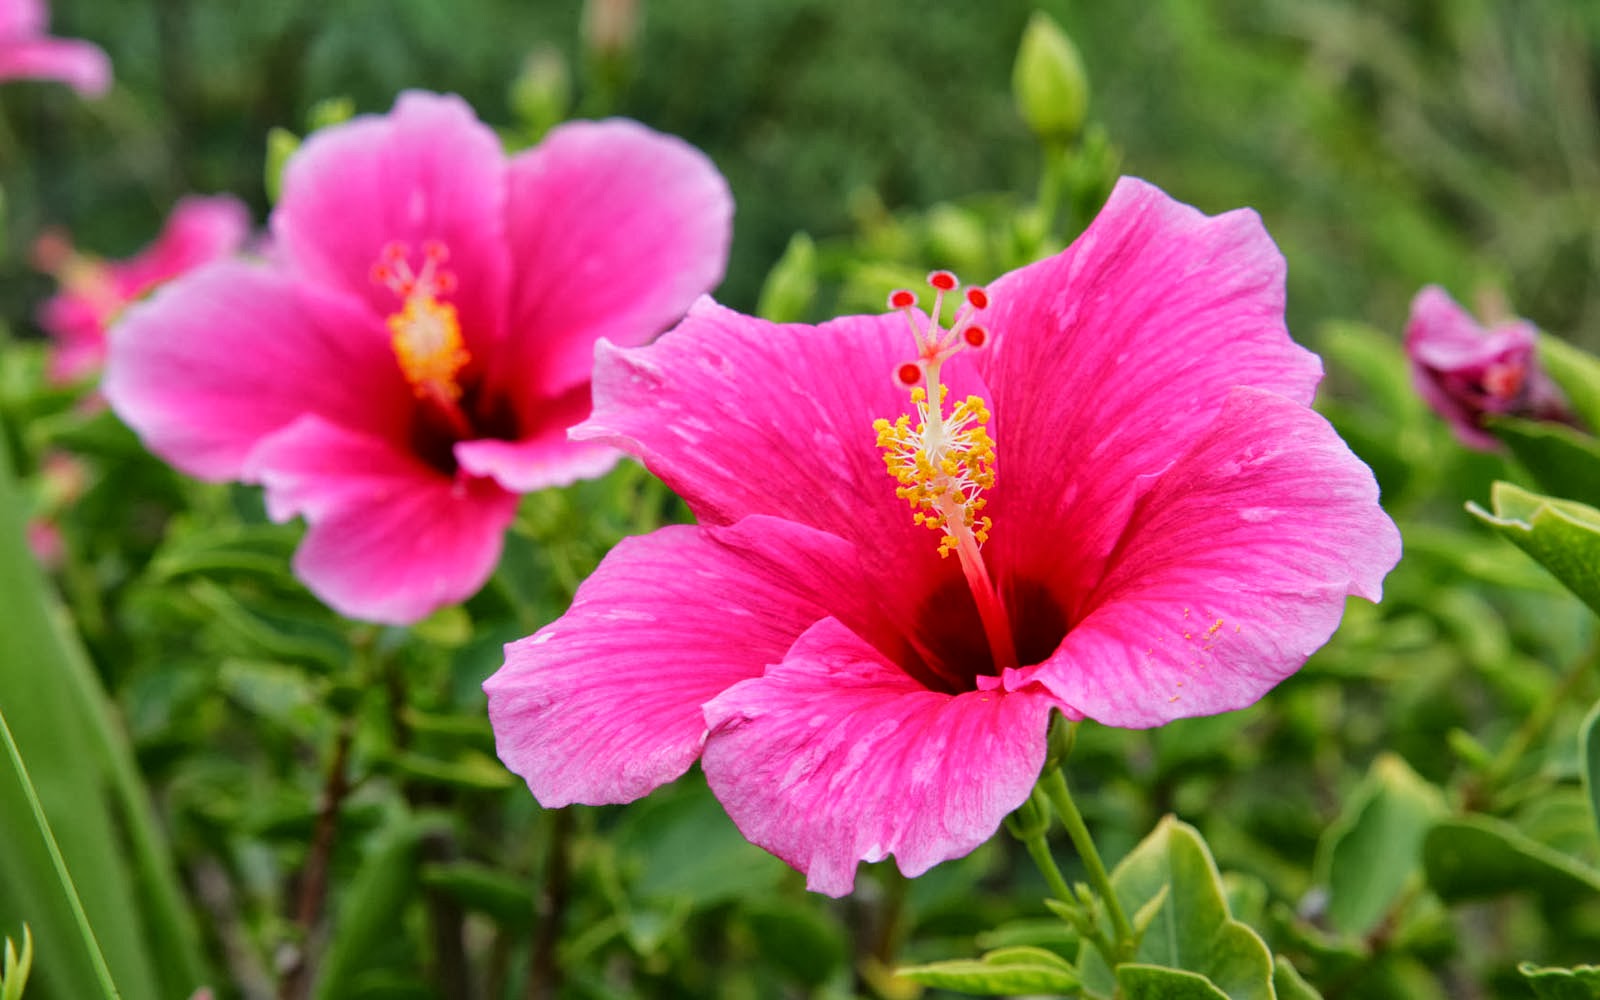 Tag Pink Hibiscus Flower Wallpapers Backgrounds Photos Images and